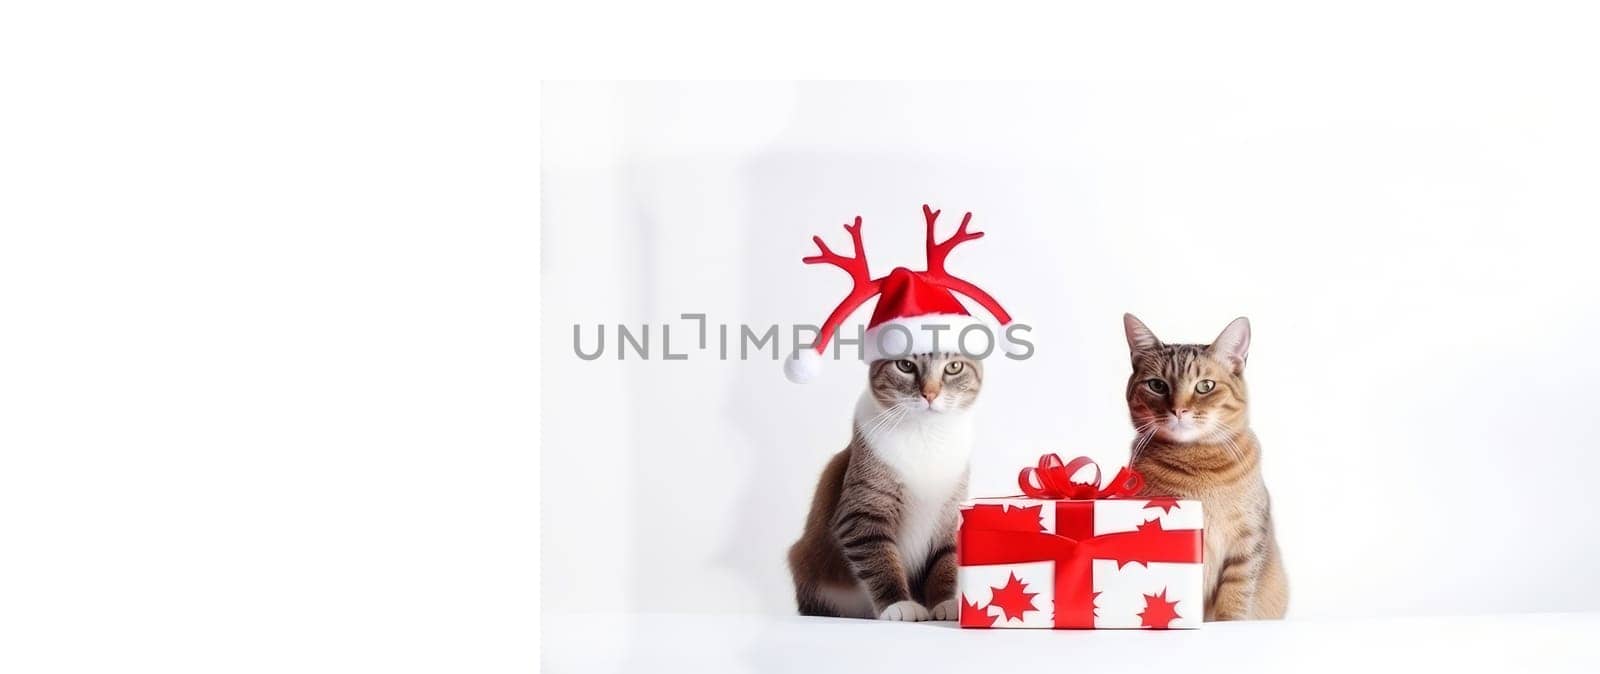 Cats and kittens celebrating the Christmas holidays in a red santa claus hat, reindeer antlers and a red gift ribbon on a white background. AI generated. by Alla_Yurtayeva